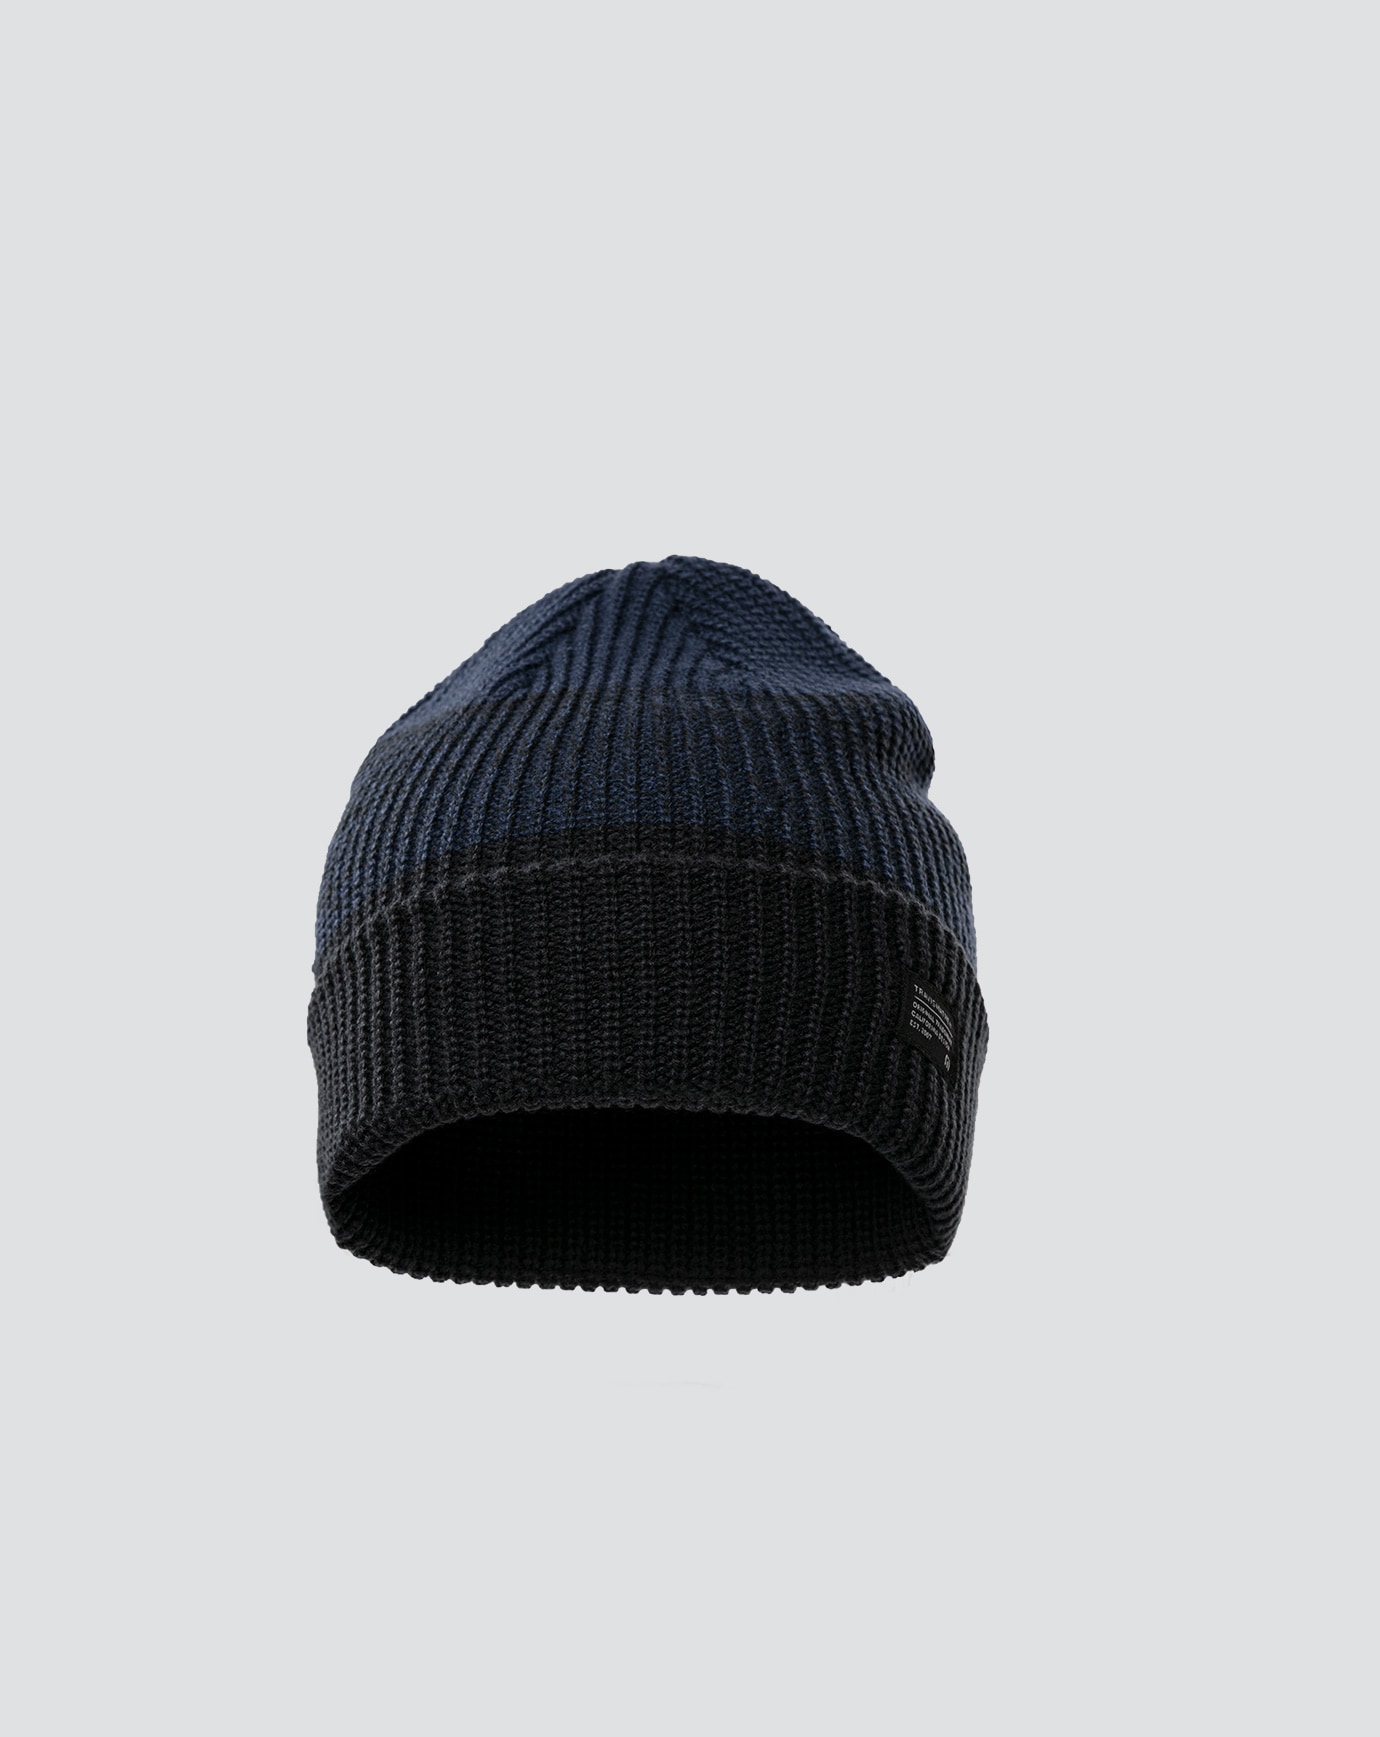 PREVAILING WINDS BEANIE